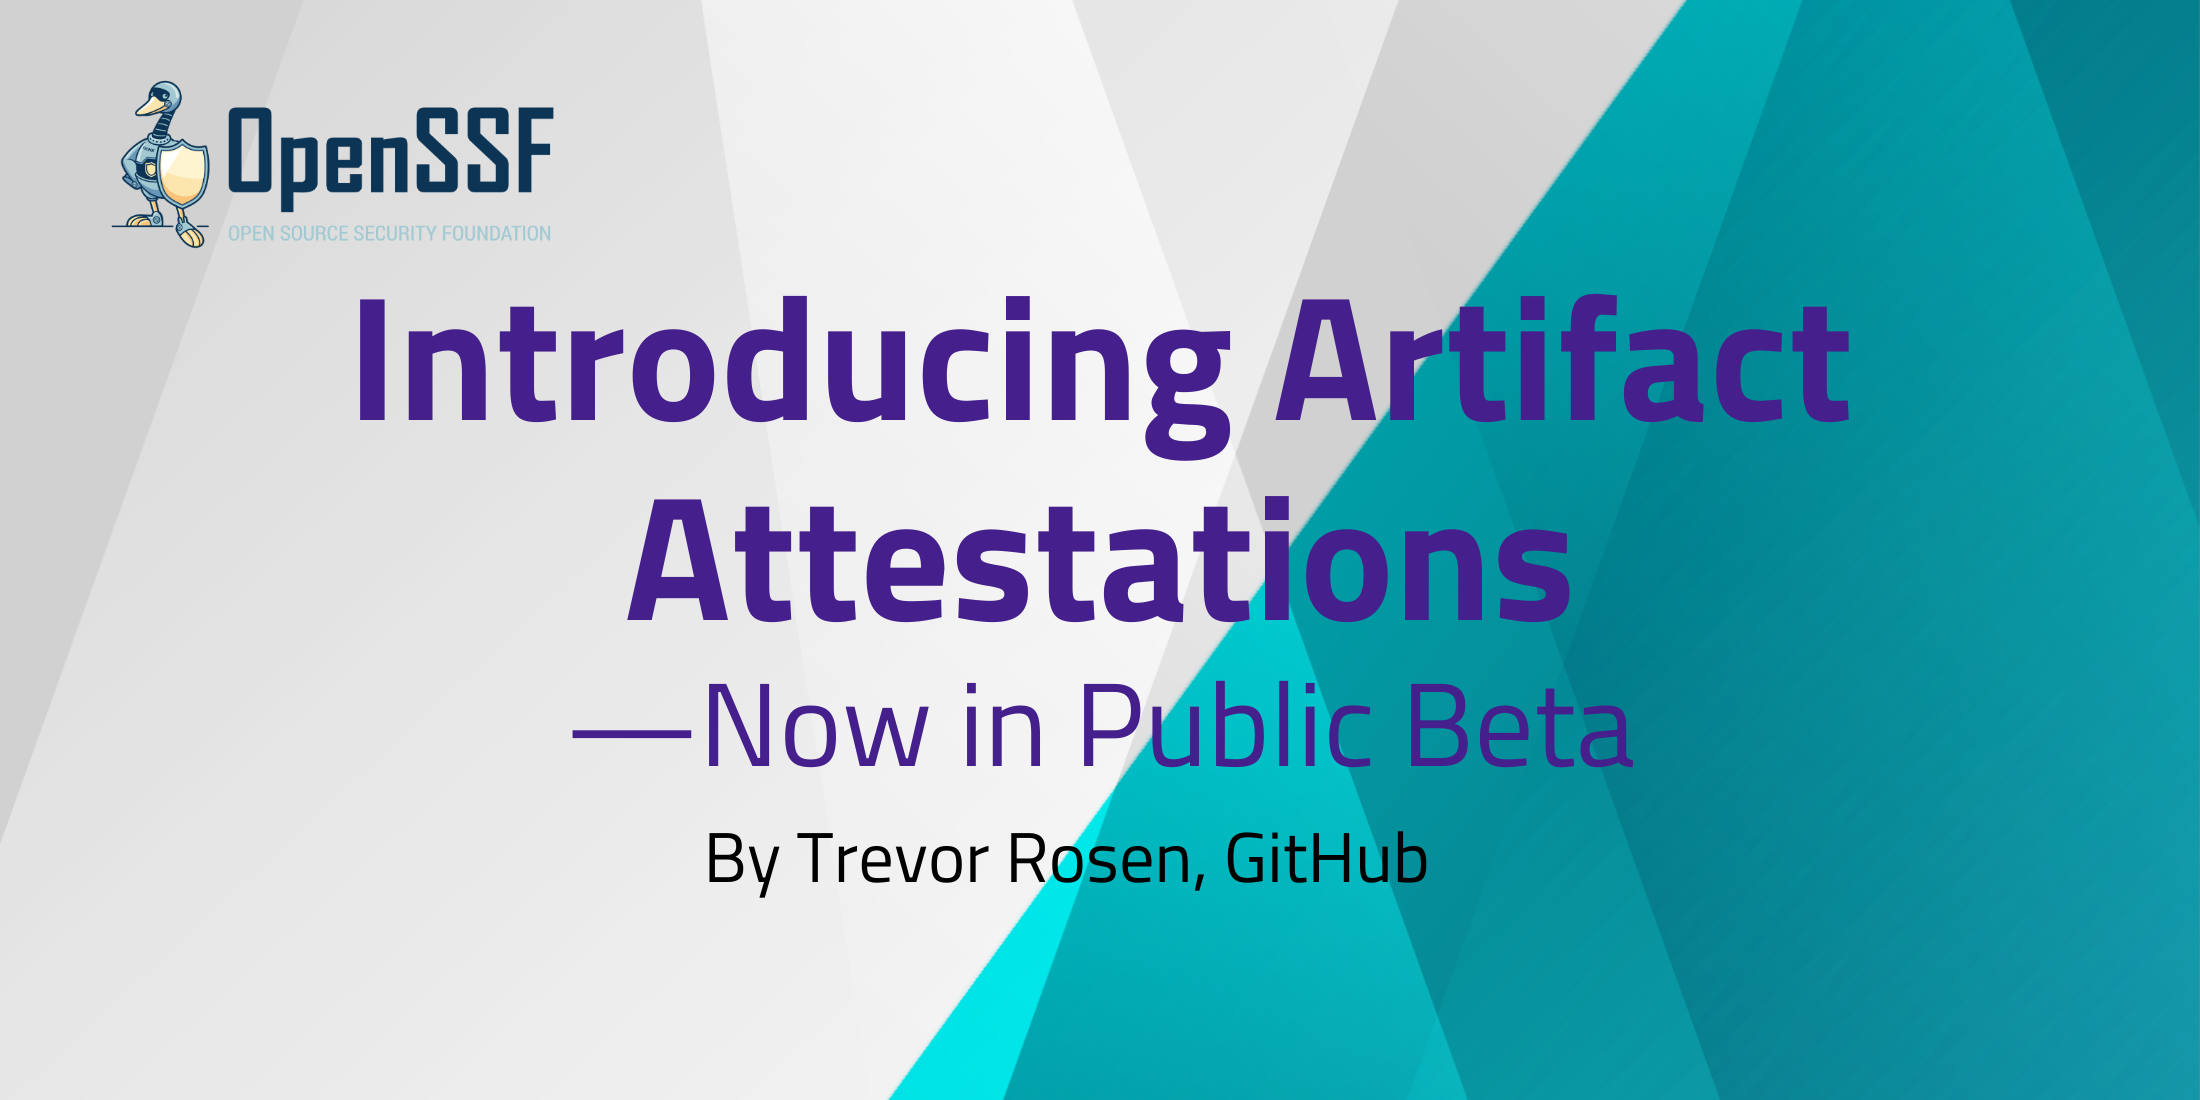 Introducing_Artifact_Attestations